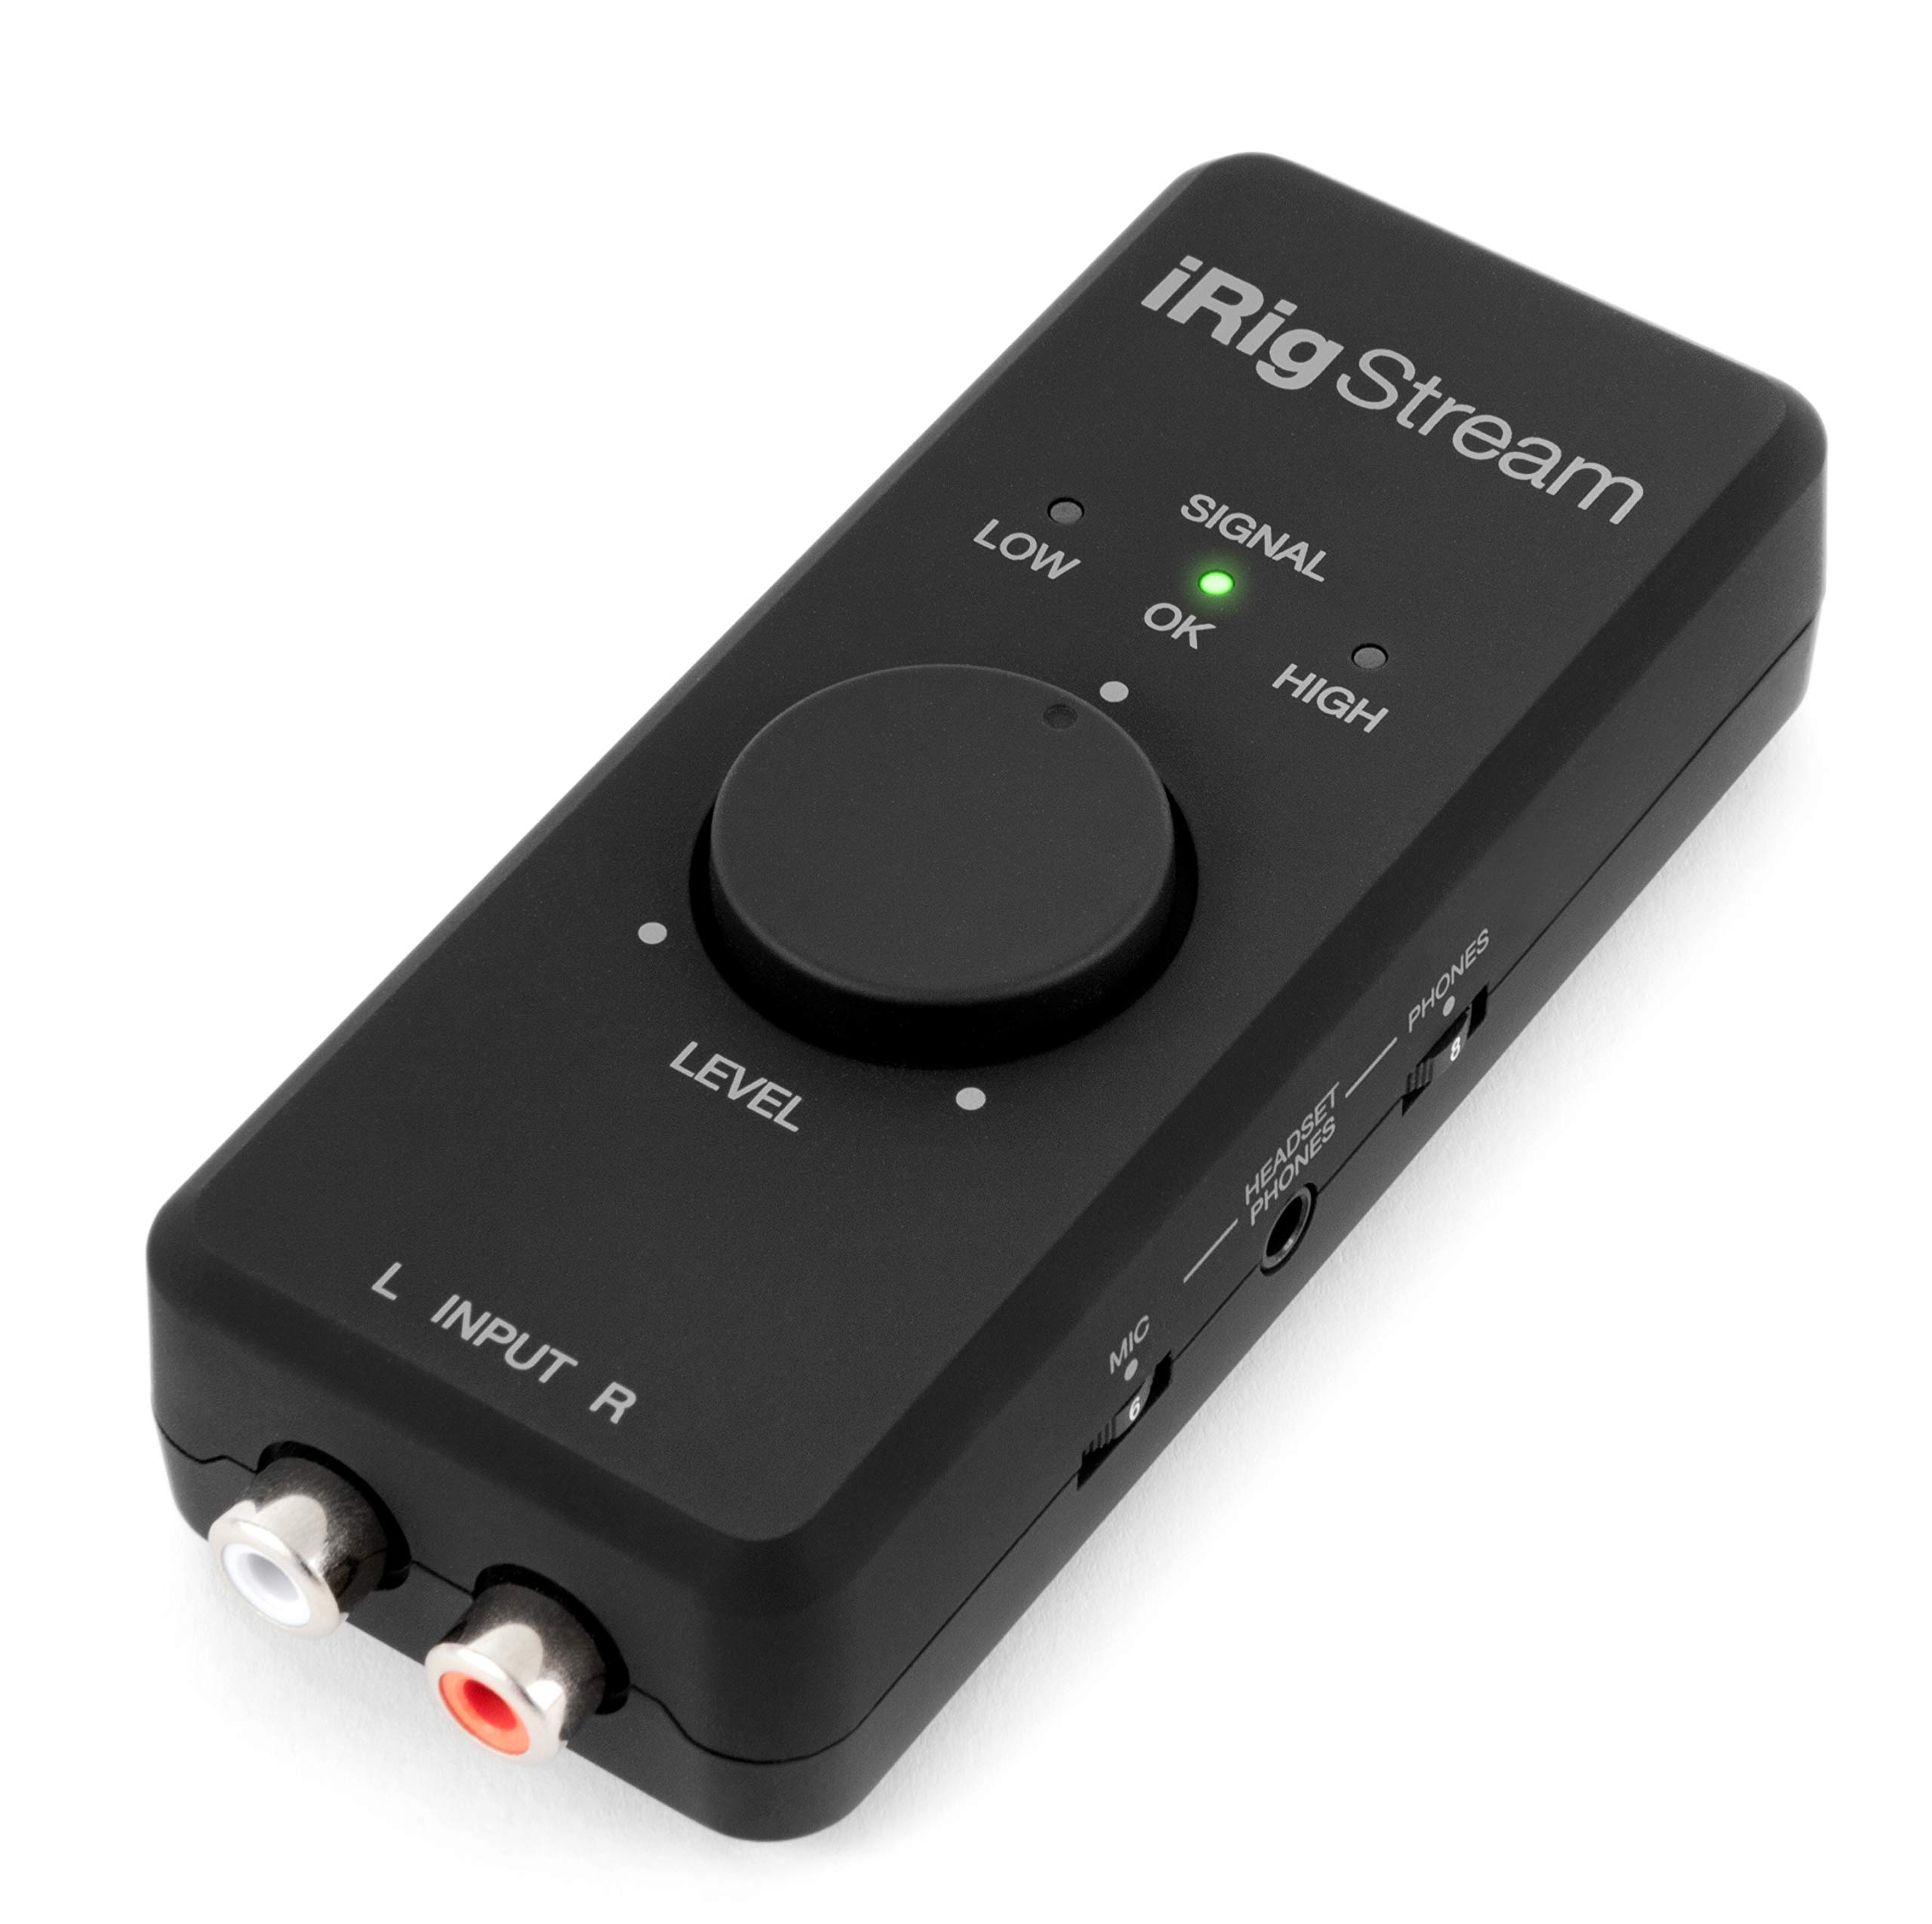 Mua IK Multimedia iRig Stream stereo audio interface for iPhone, iPad, Mac,  iOS and PC with USB-C, Lightning and USB for 24-bit, 48 kHz recording from  mixers and studio gear trên Amazon